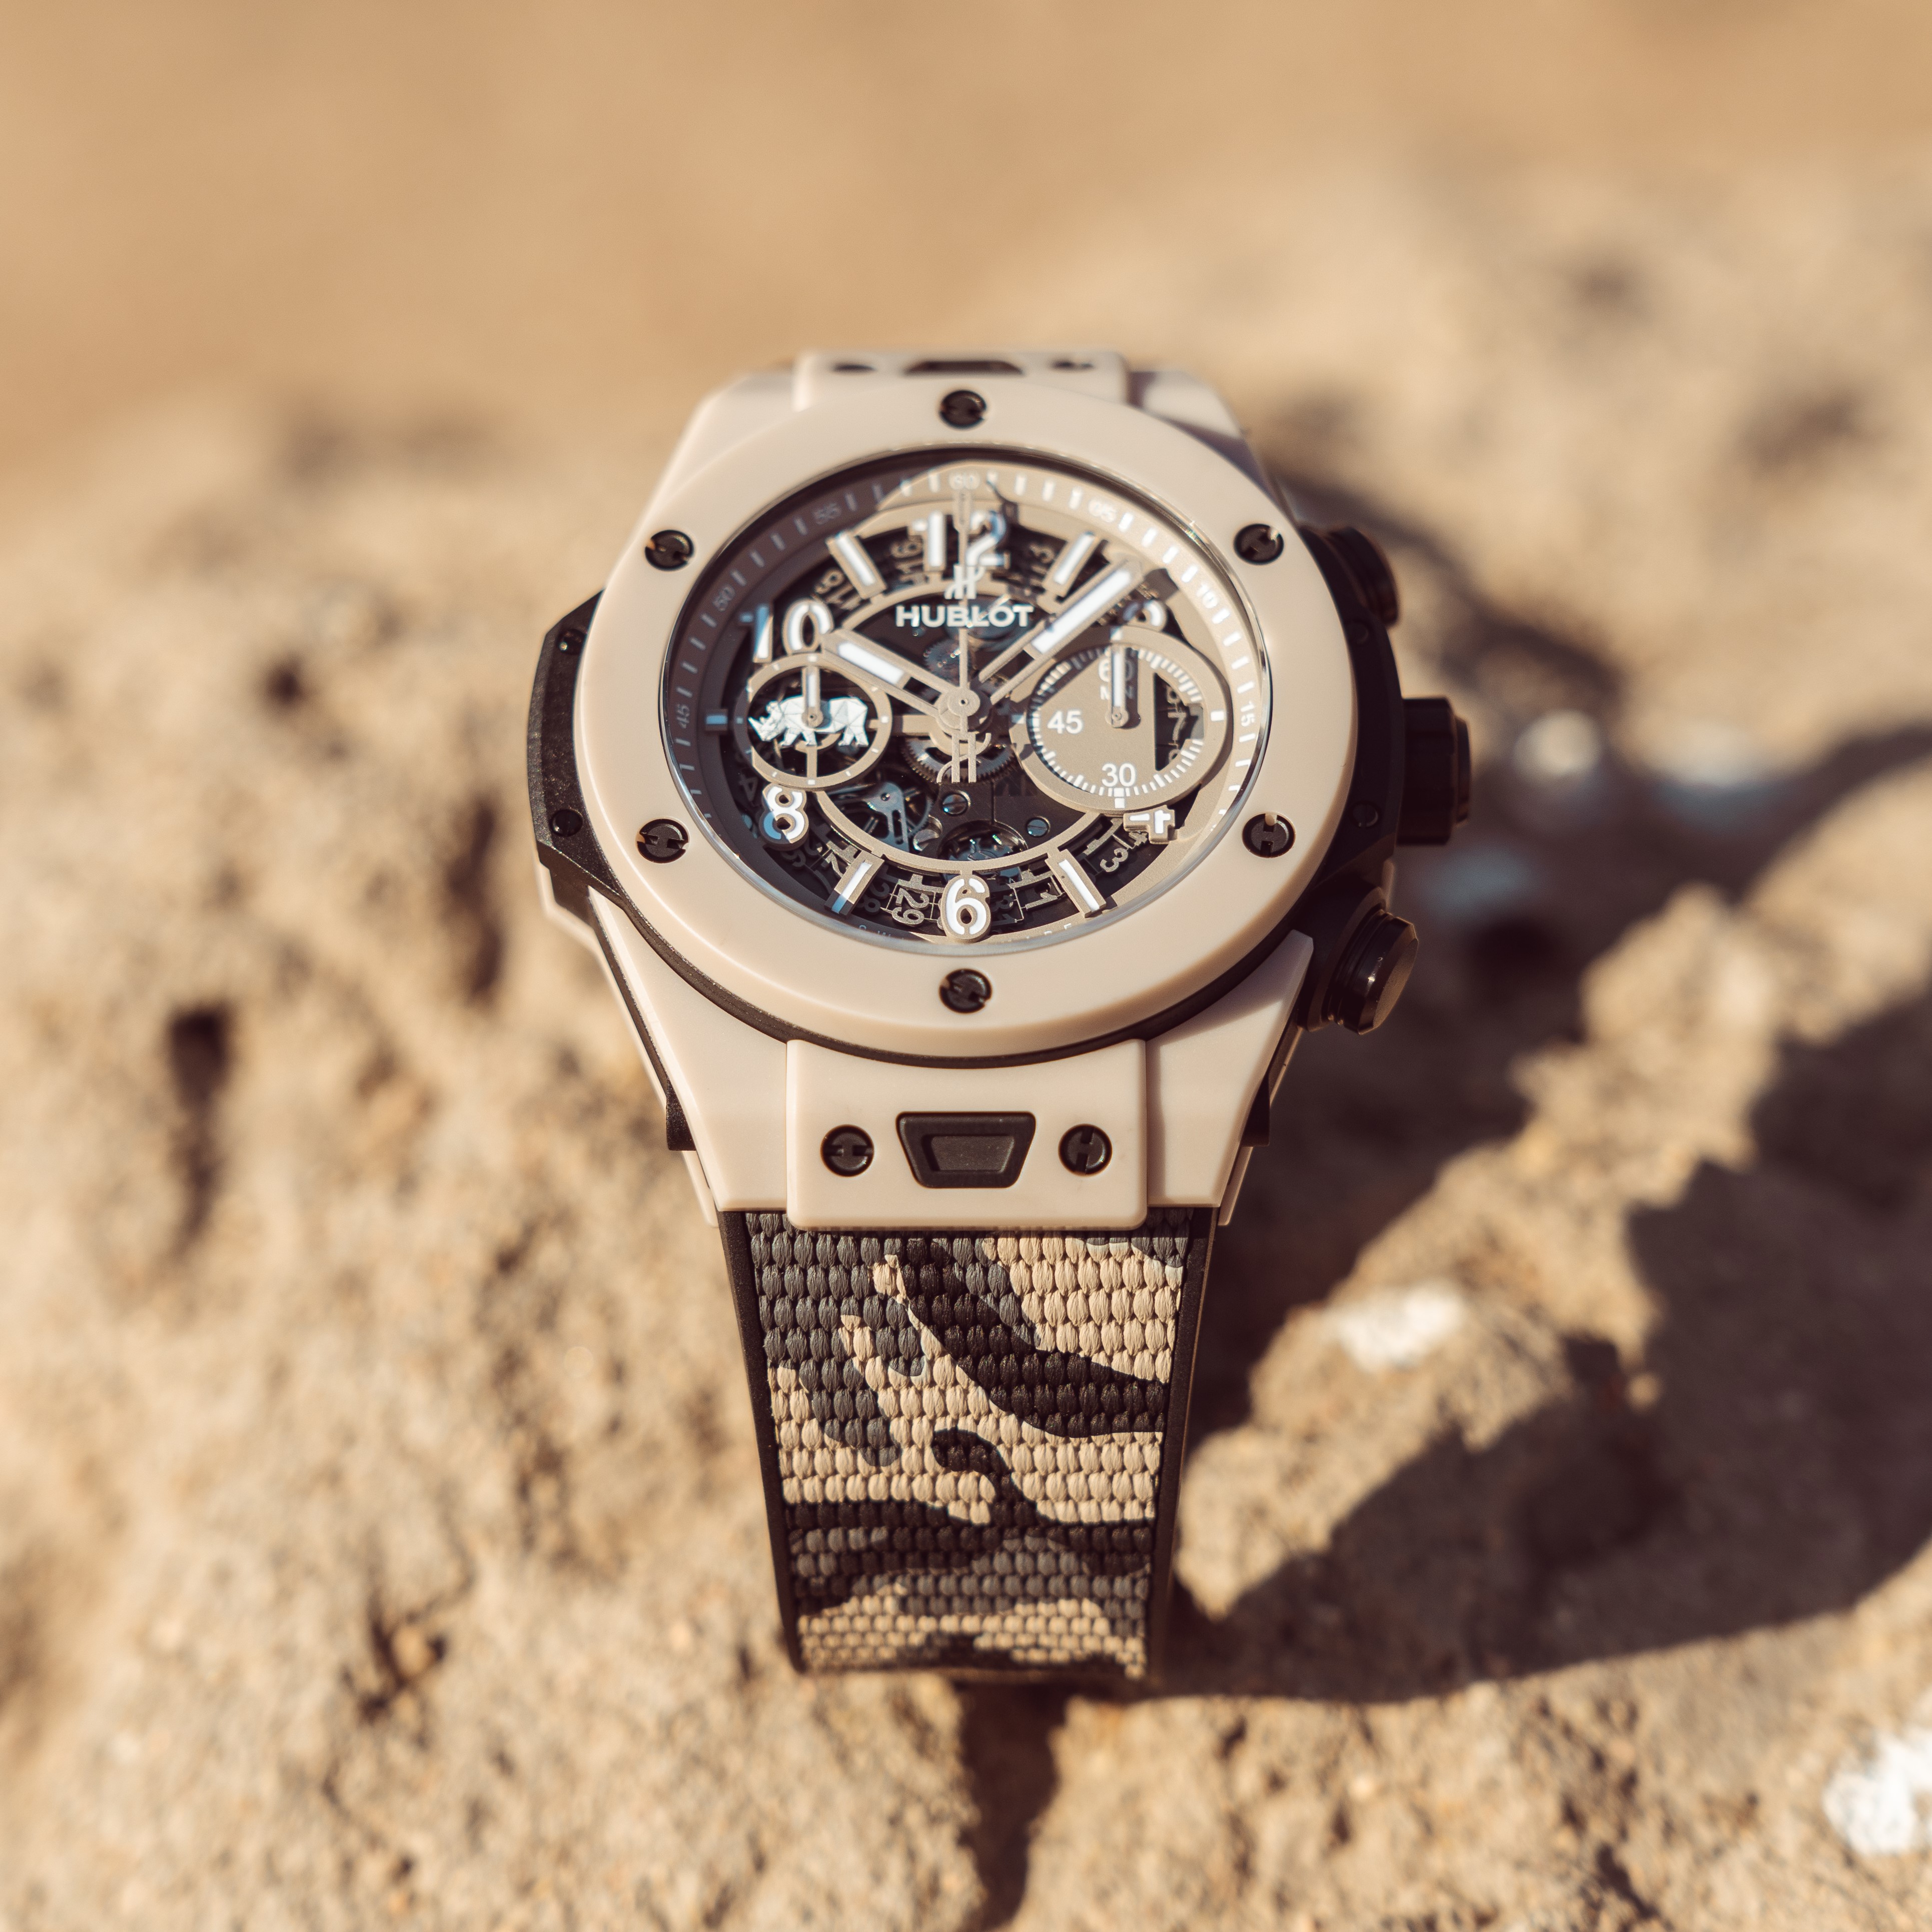 ACT WITH HUBLOT TO CONSERVE RHINOCEROSES, A BIODIVERSITY EMERGENCY